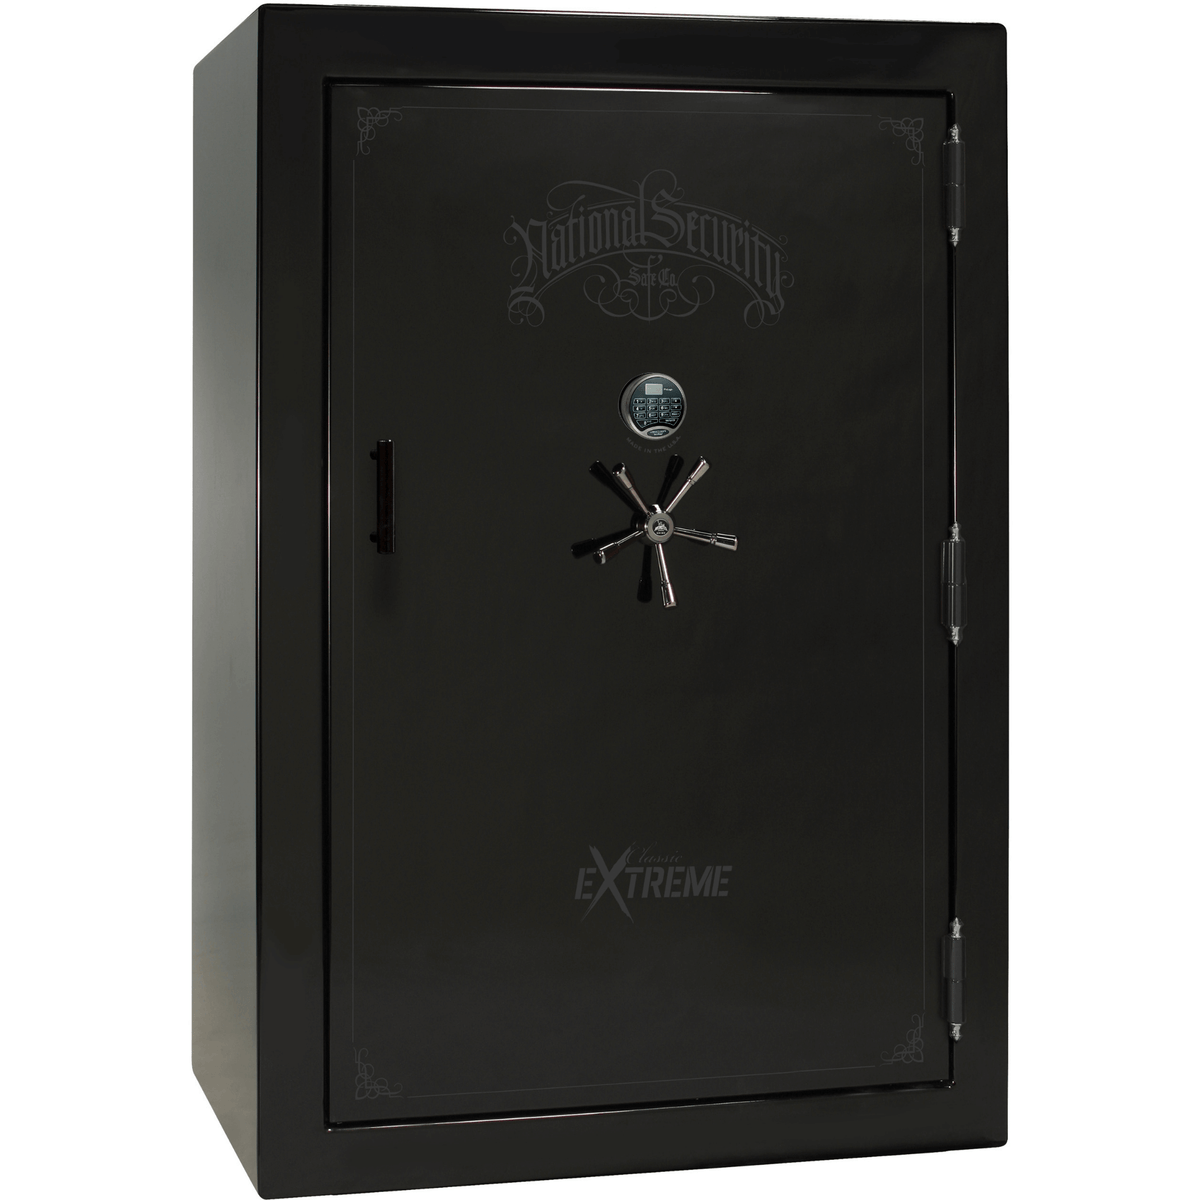 Liberty Classic Select Extreme Wide Body Safe in Black Gloss with Black Chrome Electronic Lock.